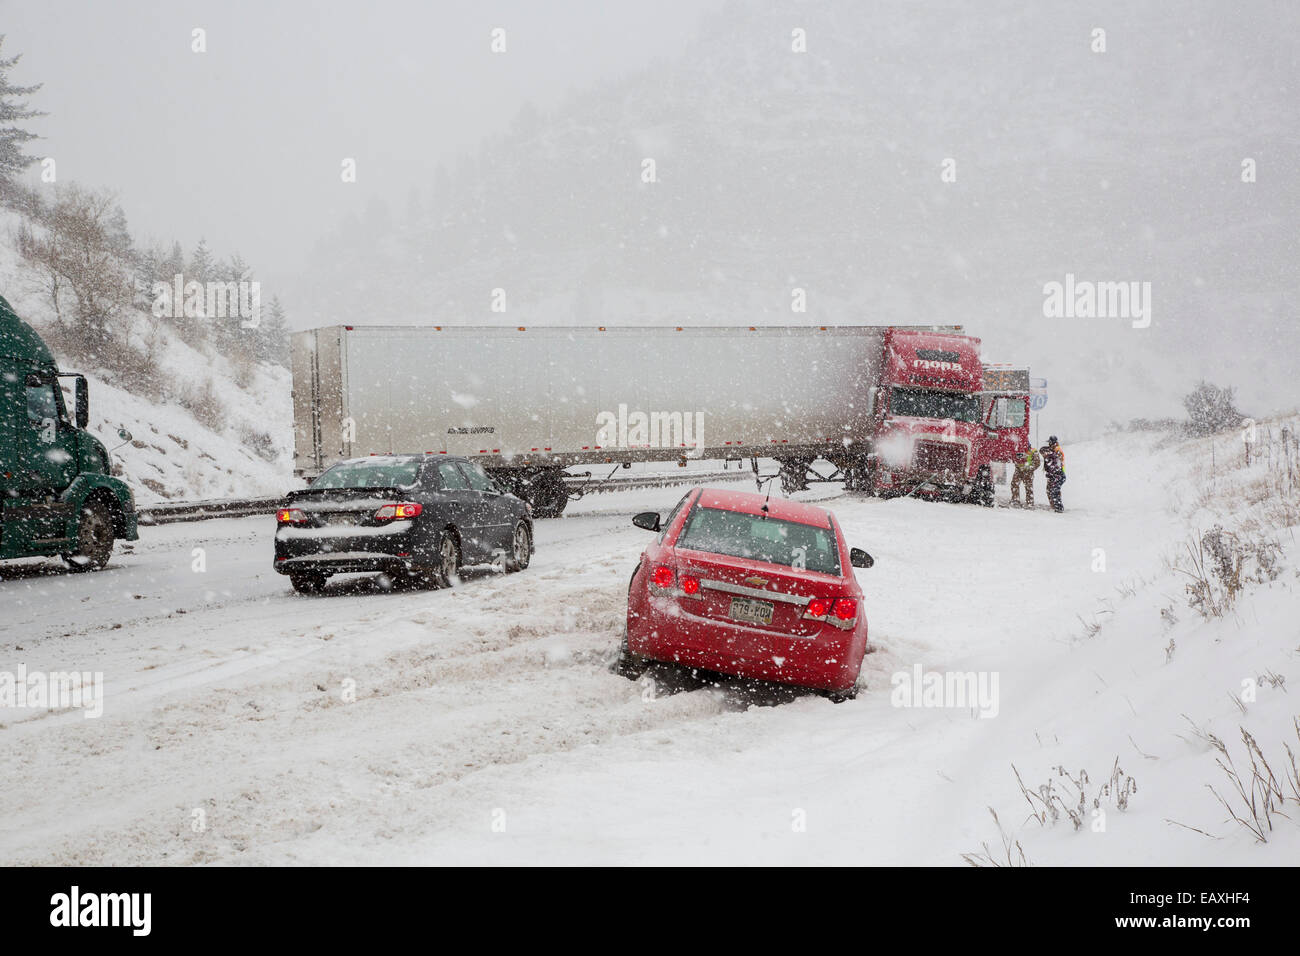 Vail, Colorado - A jackknifed truck blocks the westbound lanes of Interstate 70 during a snow storm in the Rocky Mountains. Stock Photo